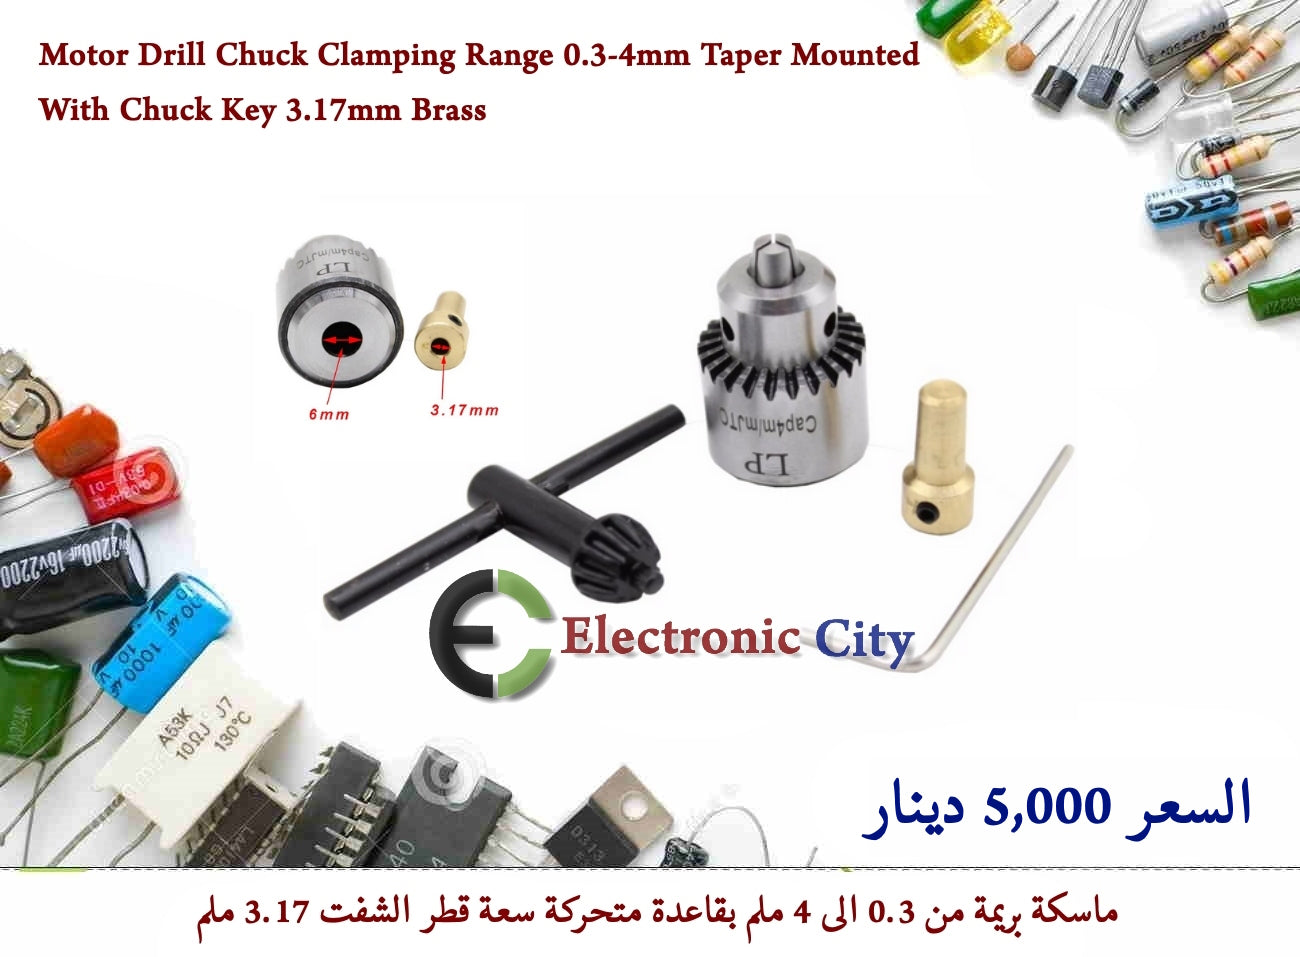 Motor Drill Chuck Clamping Range 0.3-4mm Taper Mounted With Chuck Key 3.17mm Brass